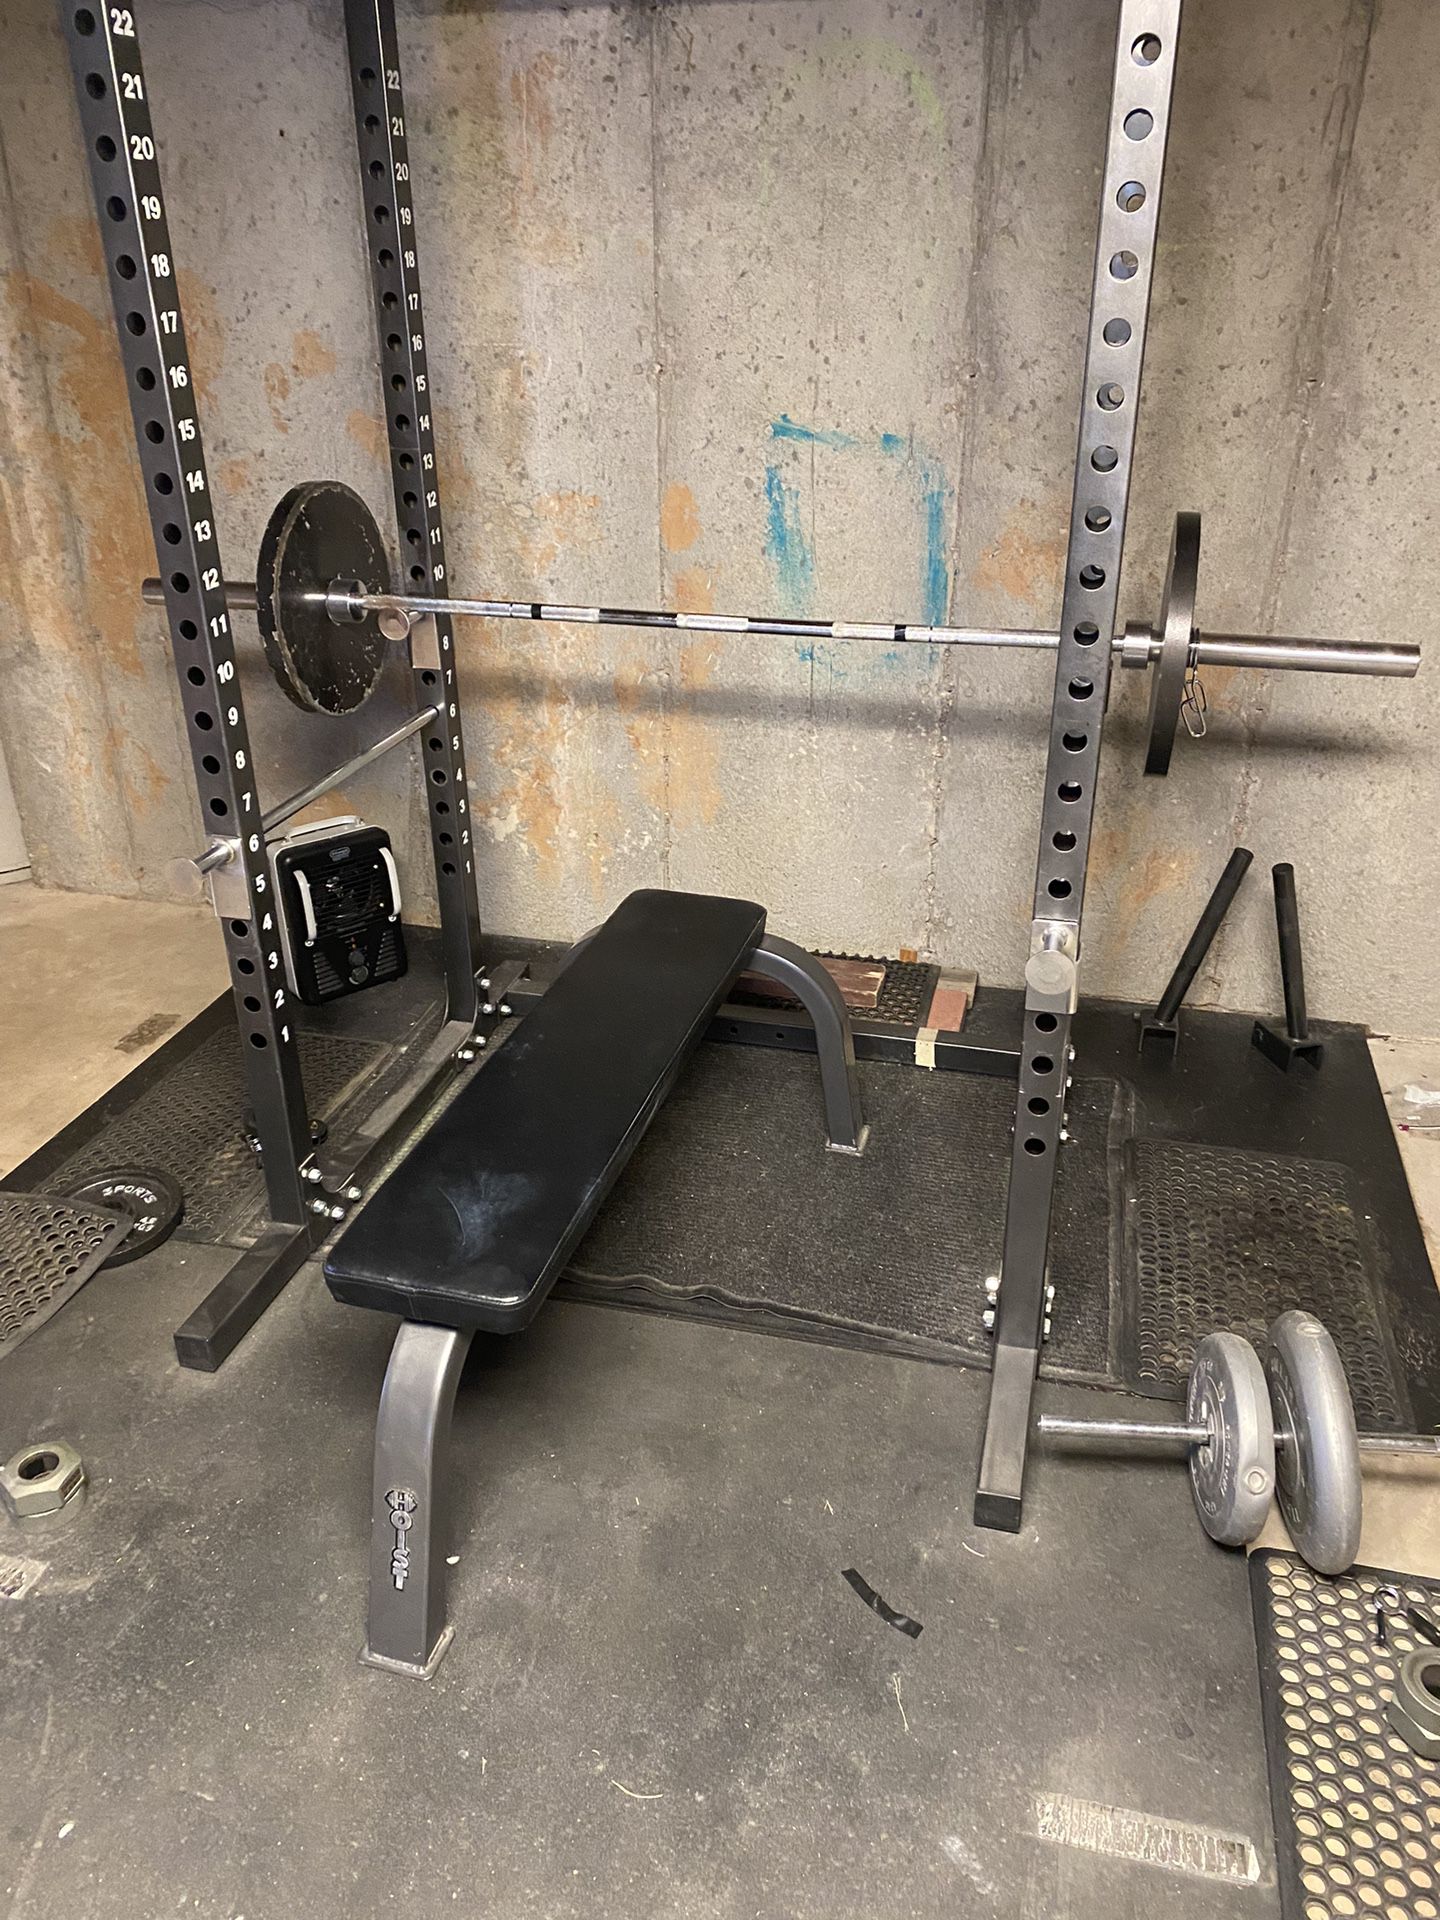 Power Cage, Bar, Bench And Olympic Weights 